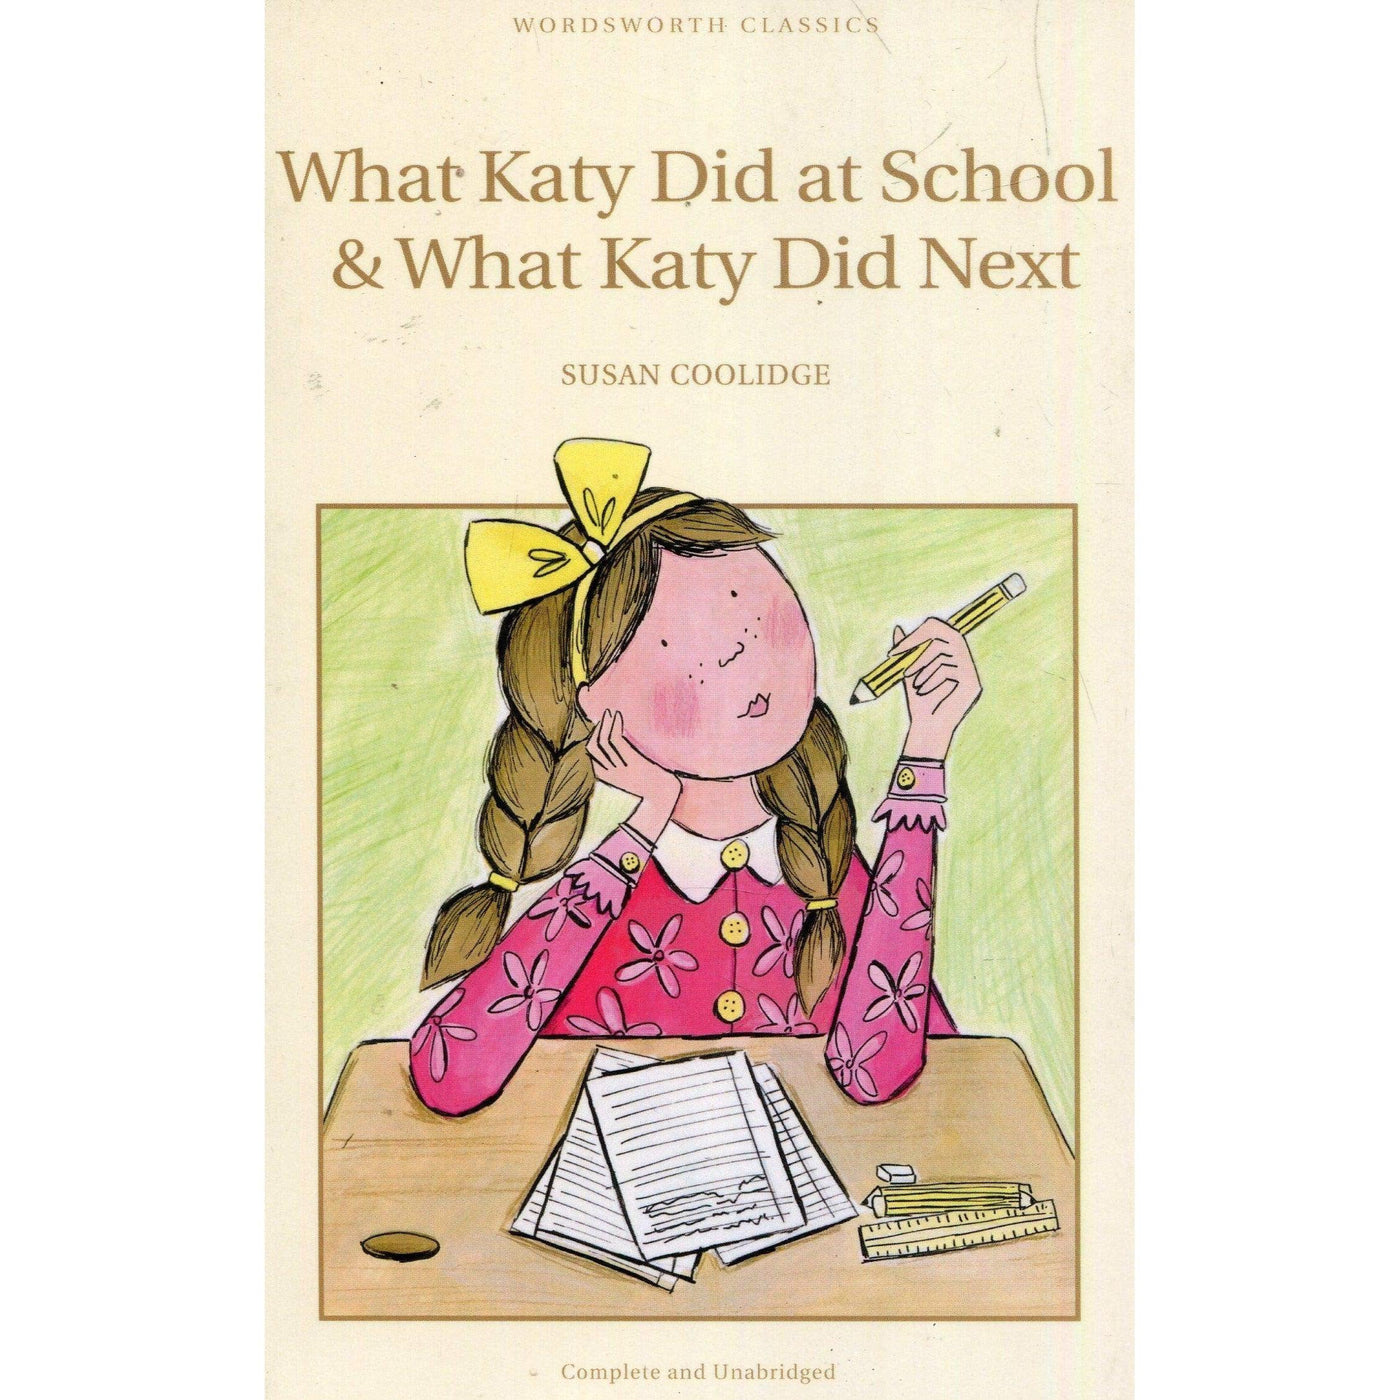 What Katy Did At School & What Katy Did Next